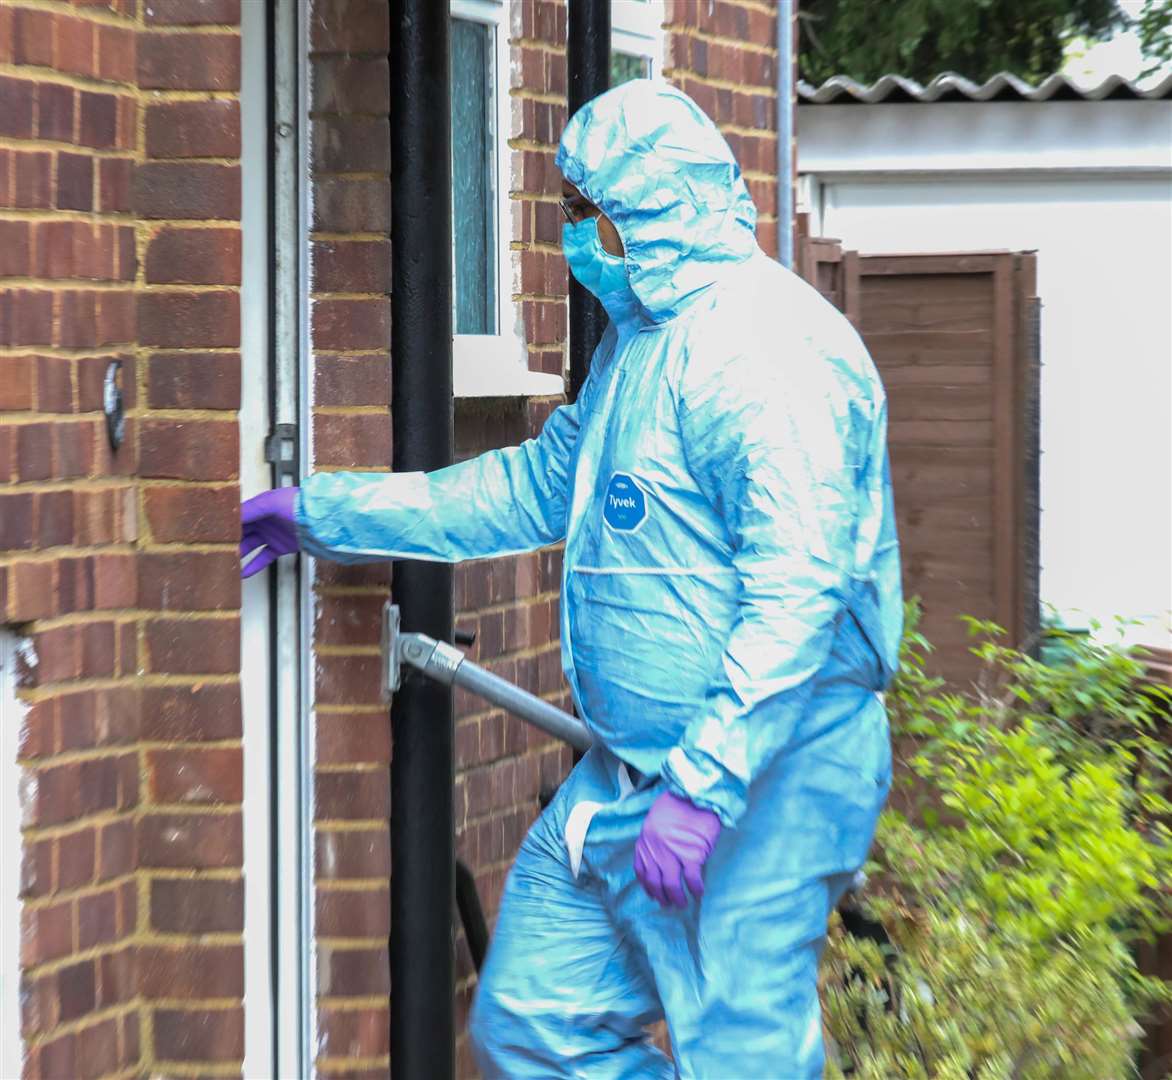 A woman was sadly found dead at the house. Picture: UKNiP